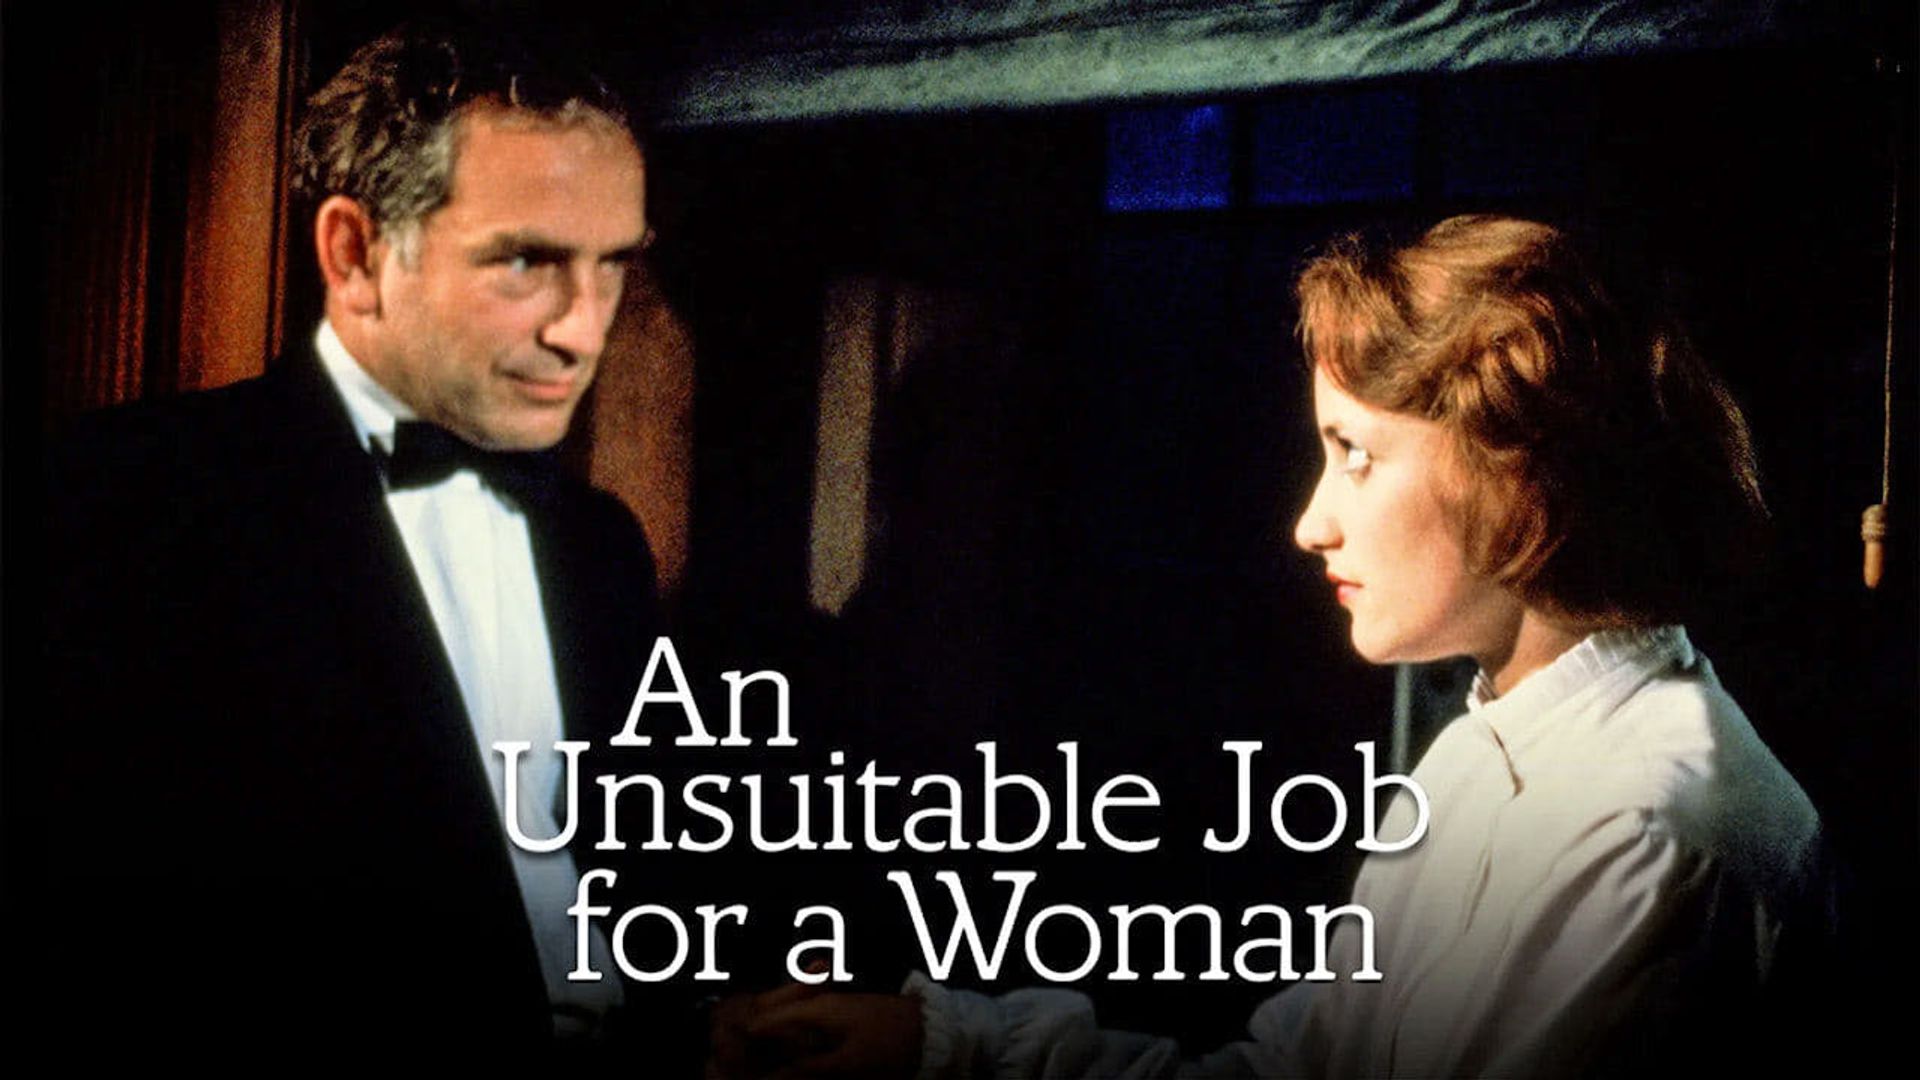 An Unsuitable Job for a Woman background